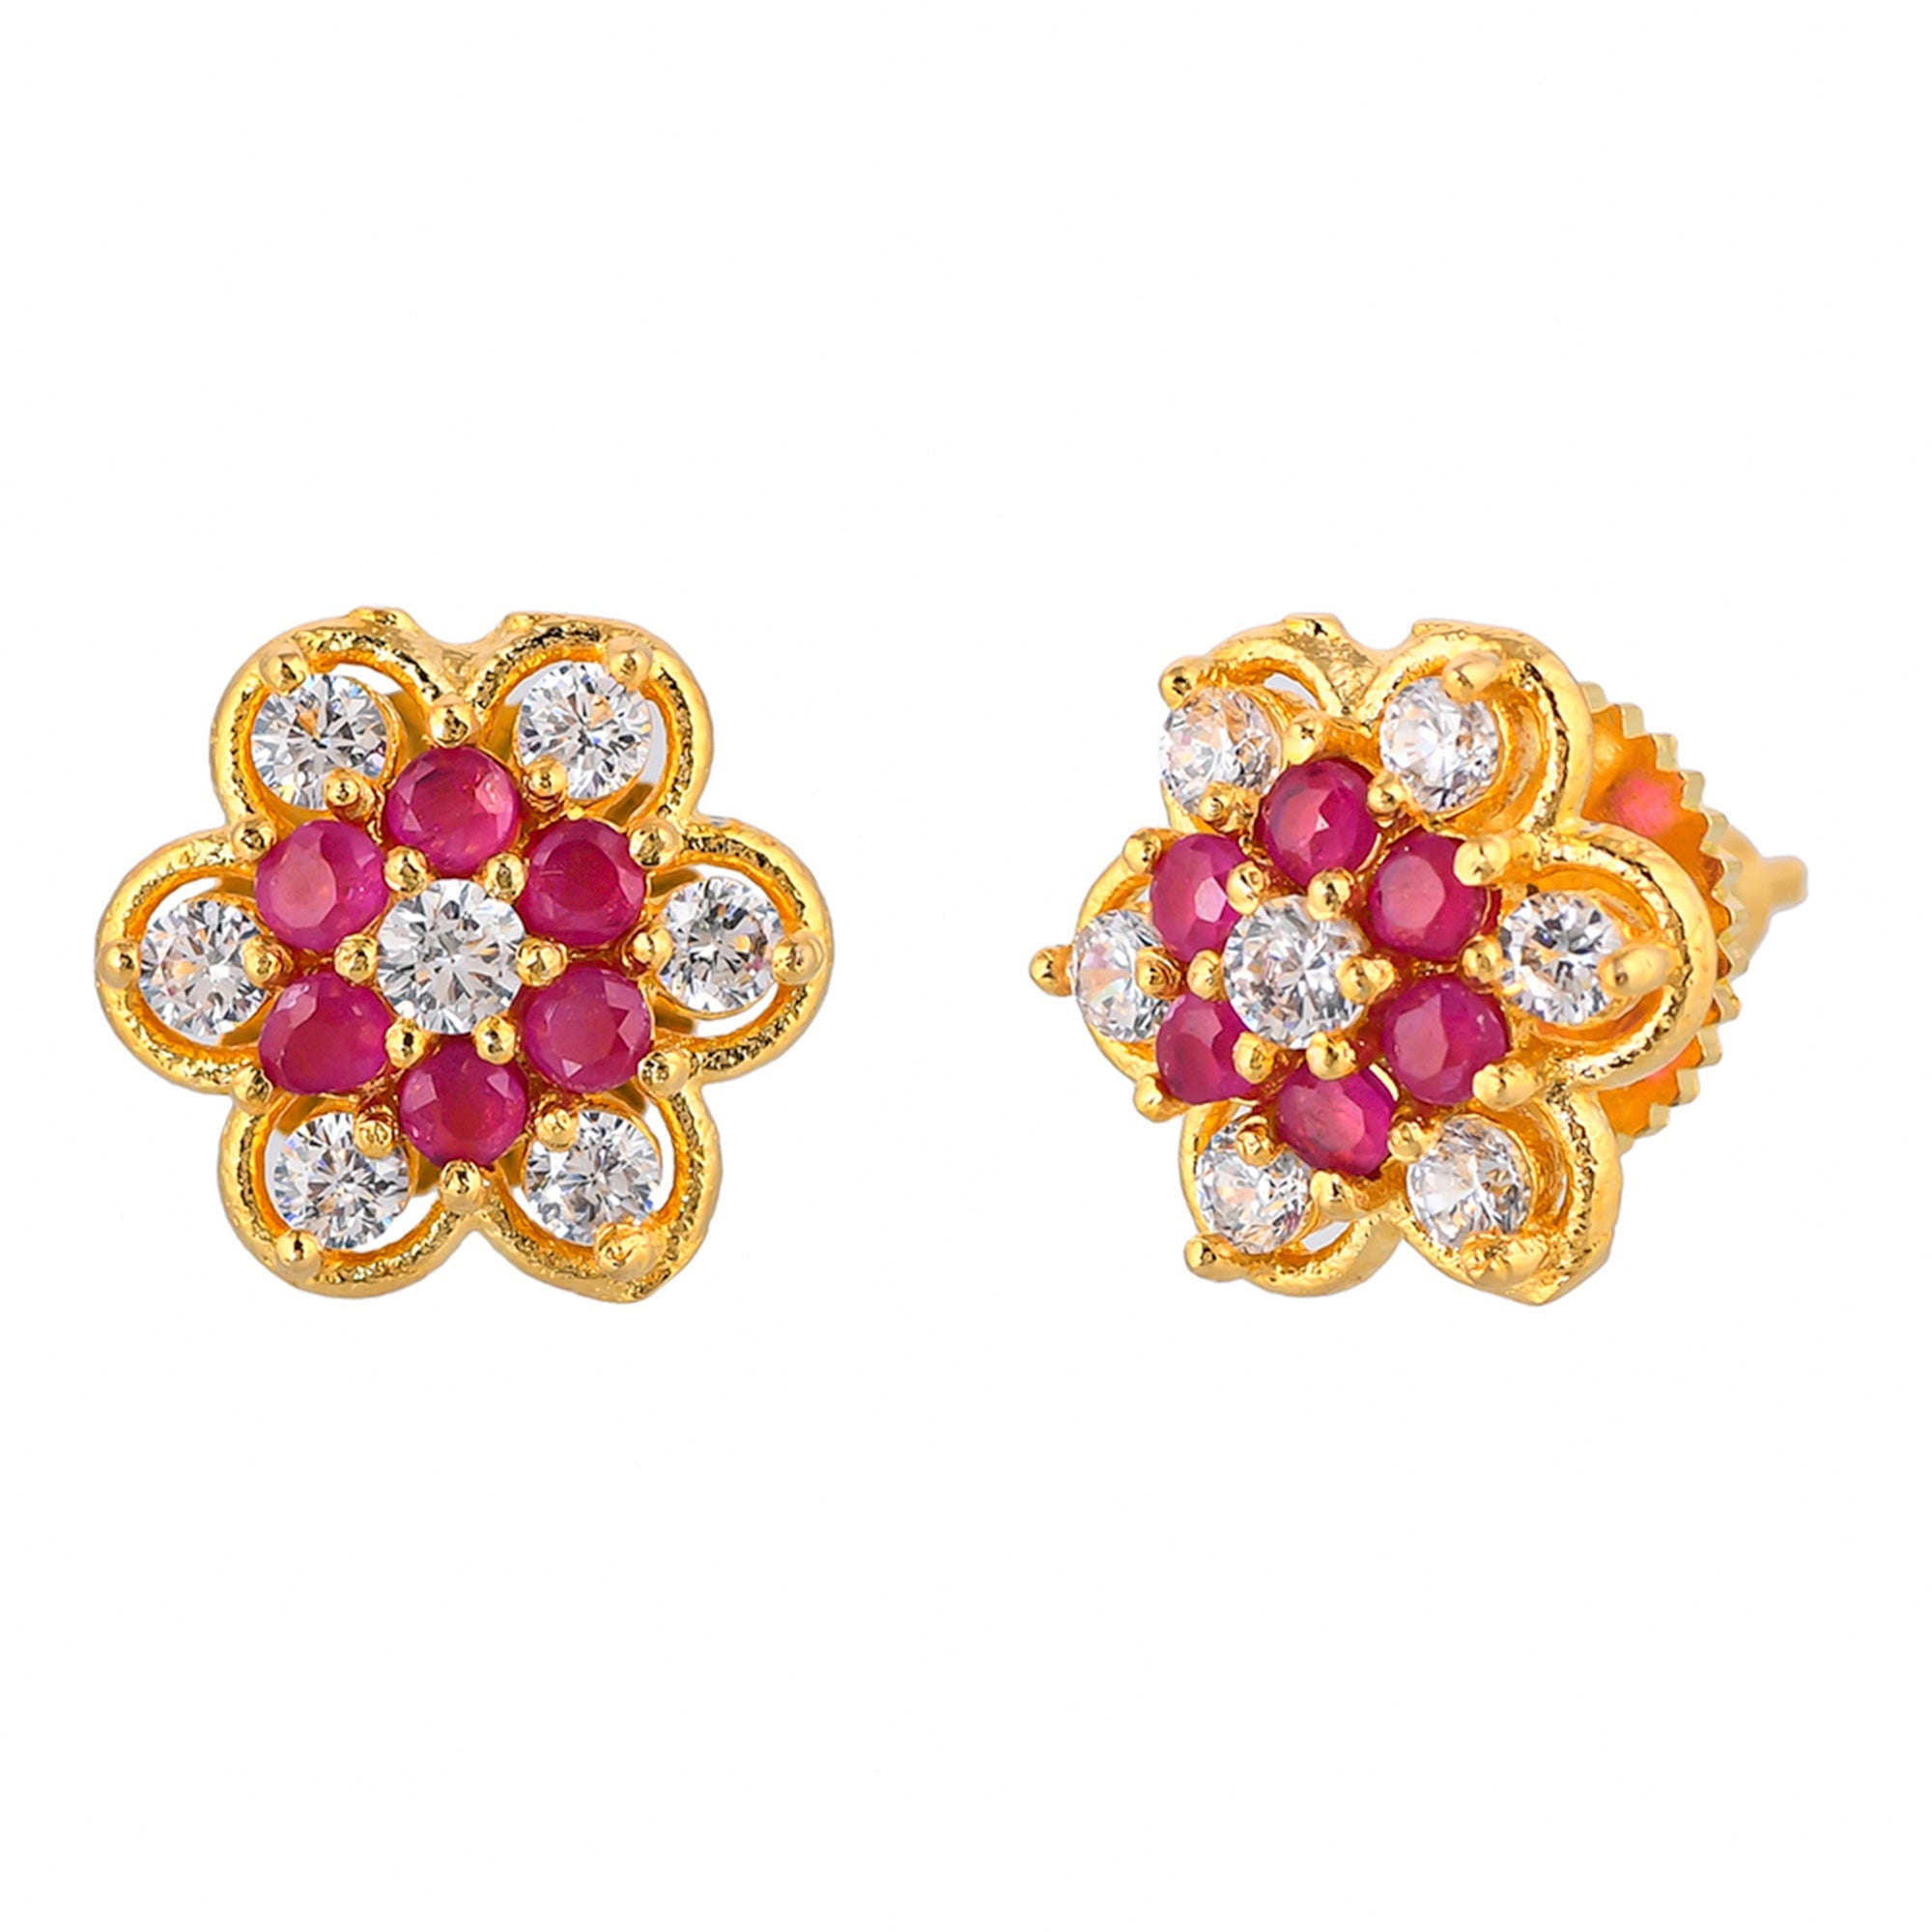 Women's Sparkling Essentials Gold Plated Floral Stud Earrings - Voylla